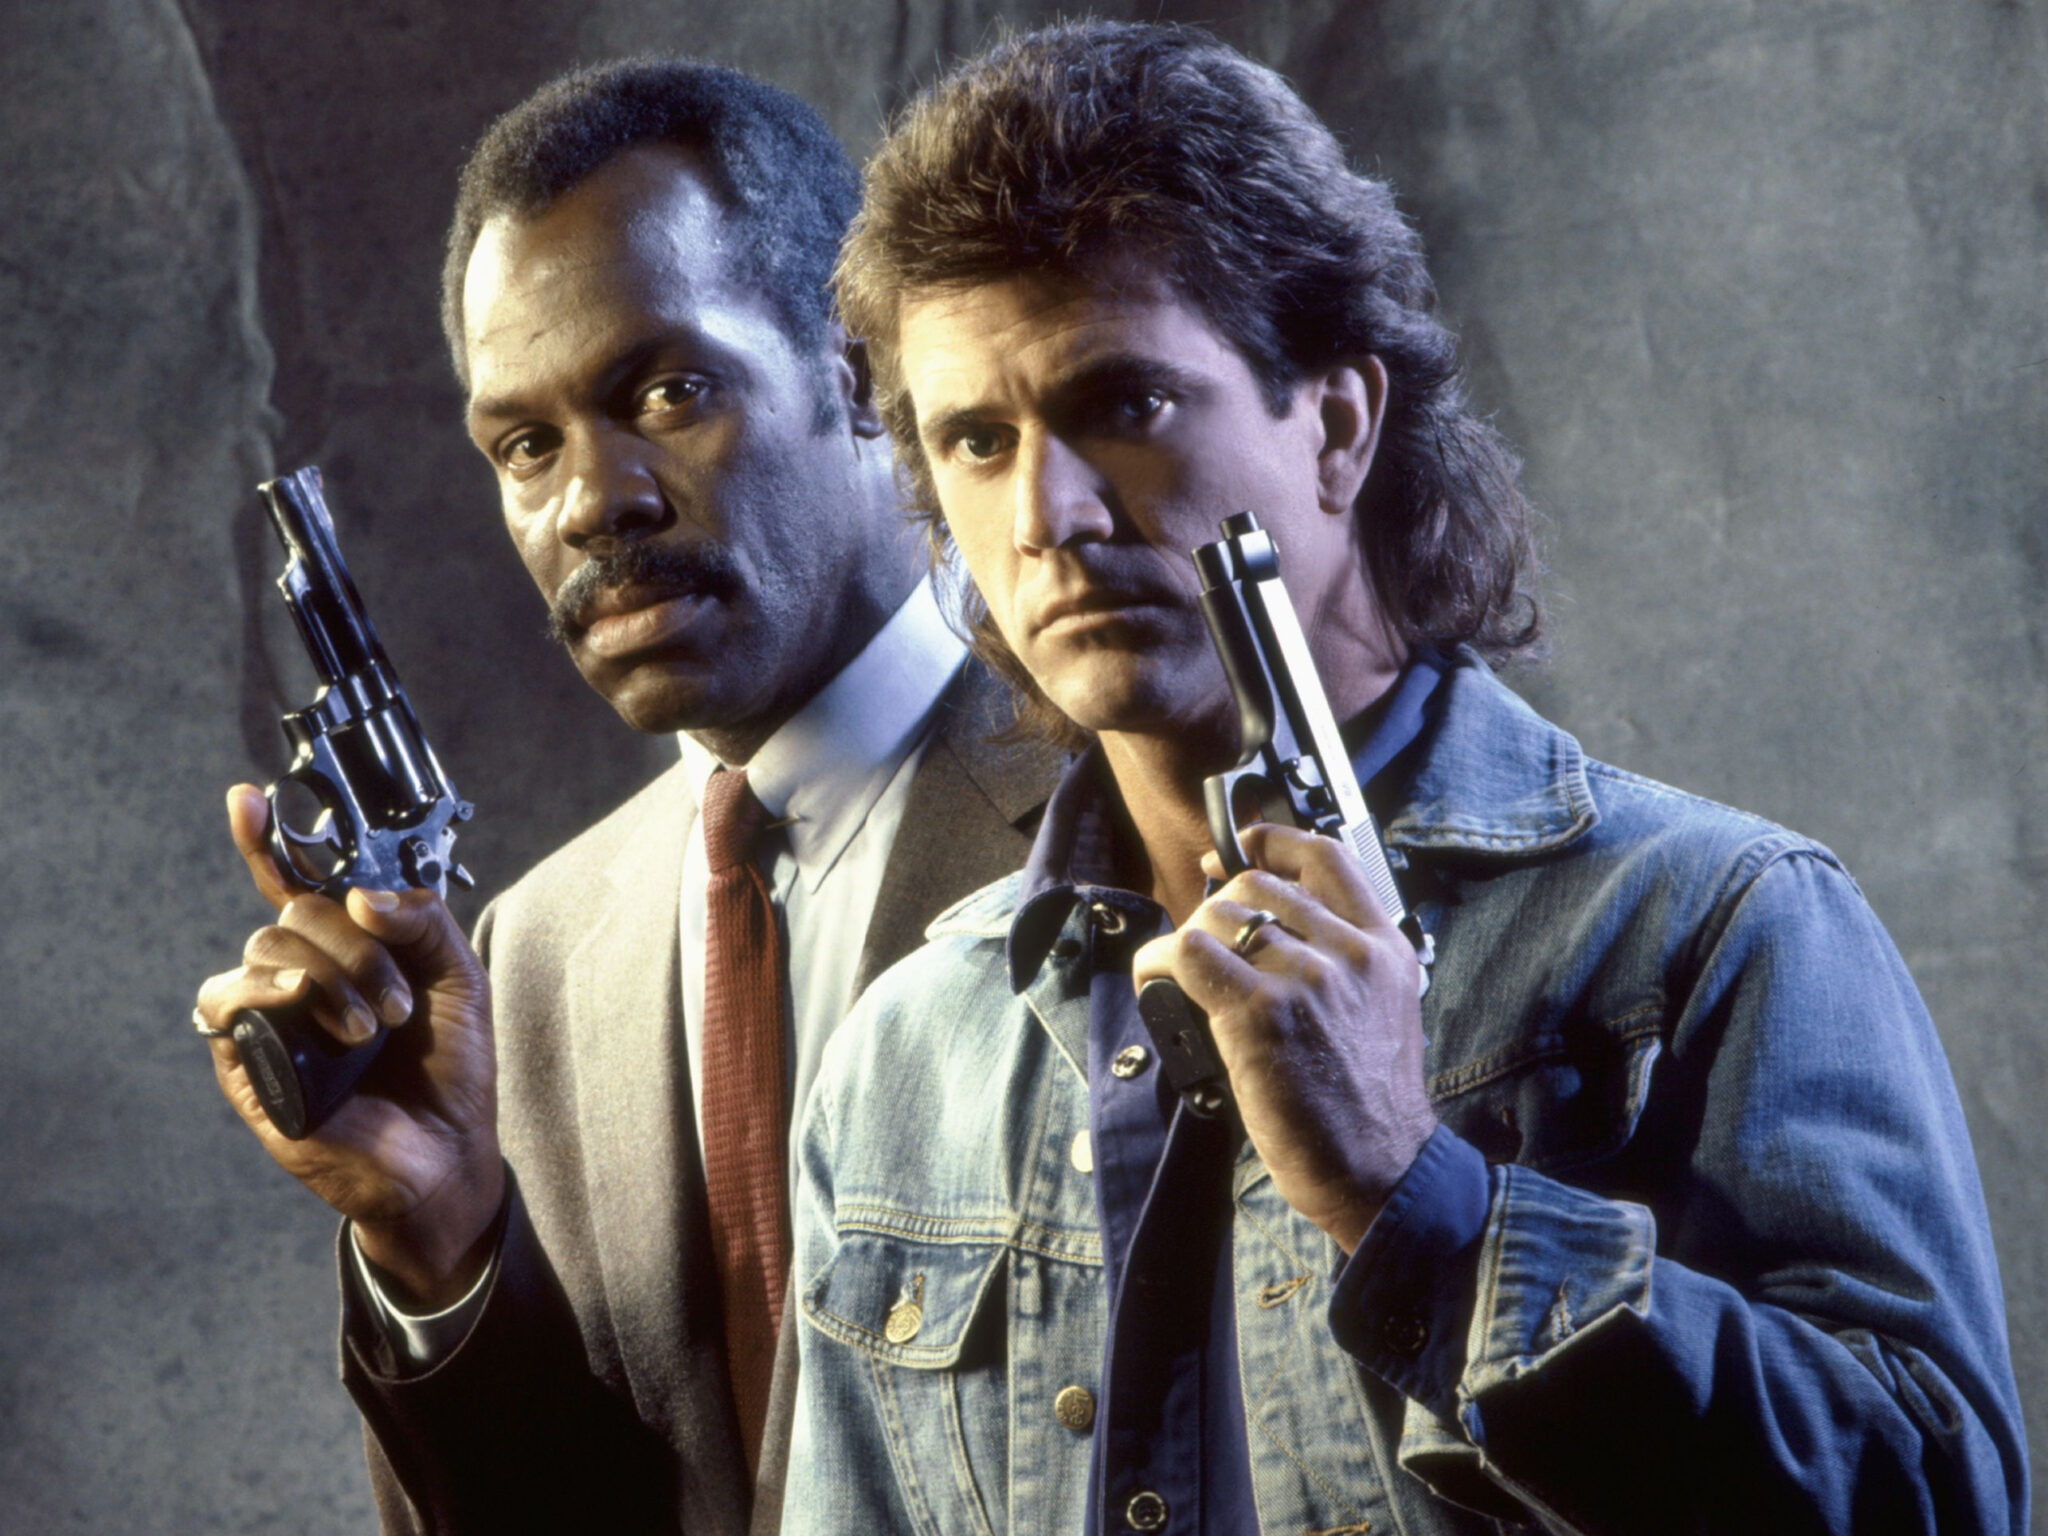 Lethal Weapon 5 Has A Director, Is The Last Film In The Franchise